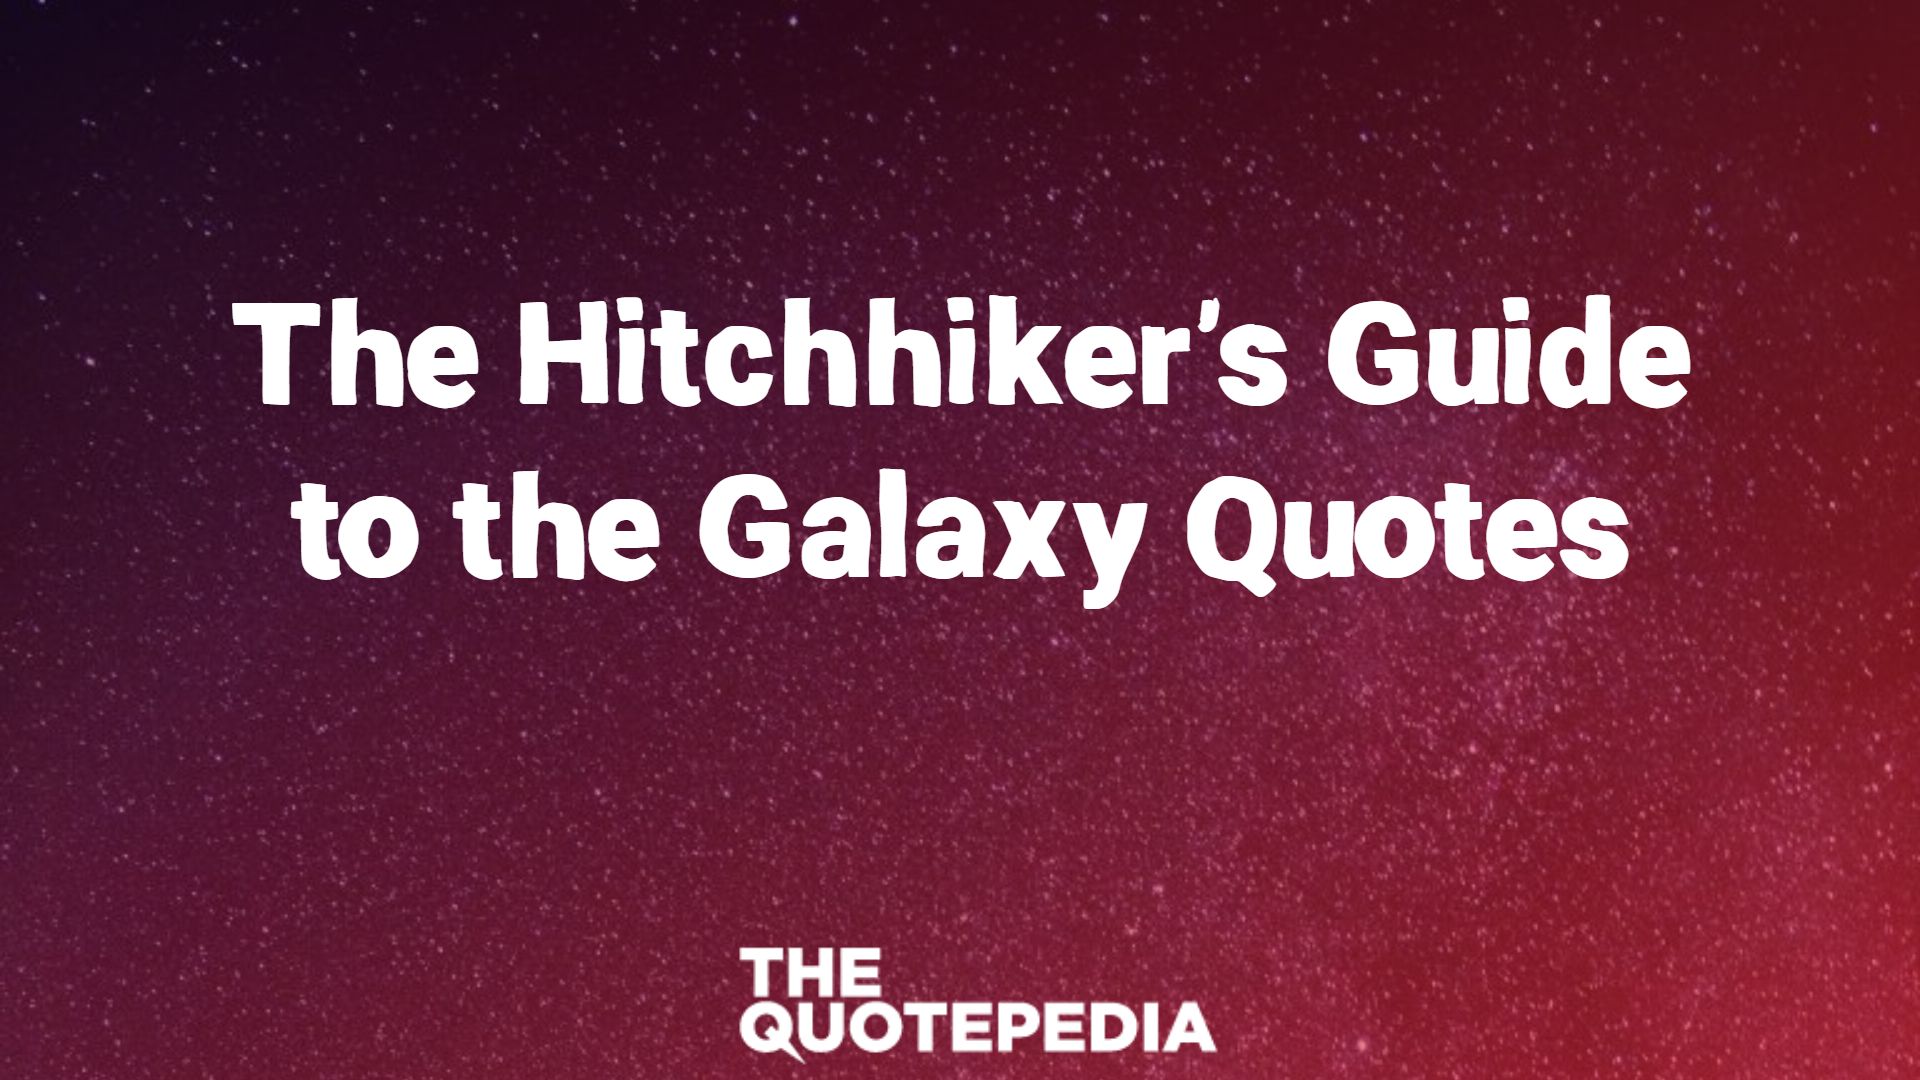 The Hitchhiker's Guide to the Galaxy Quotes